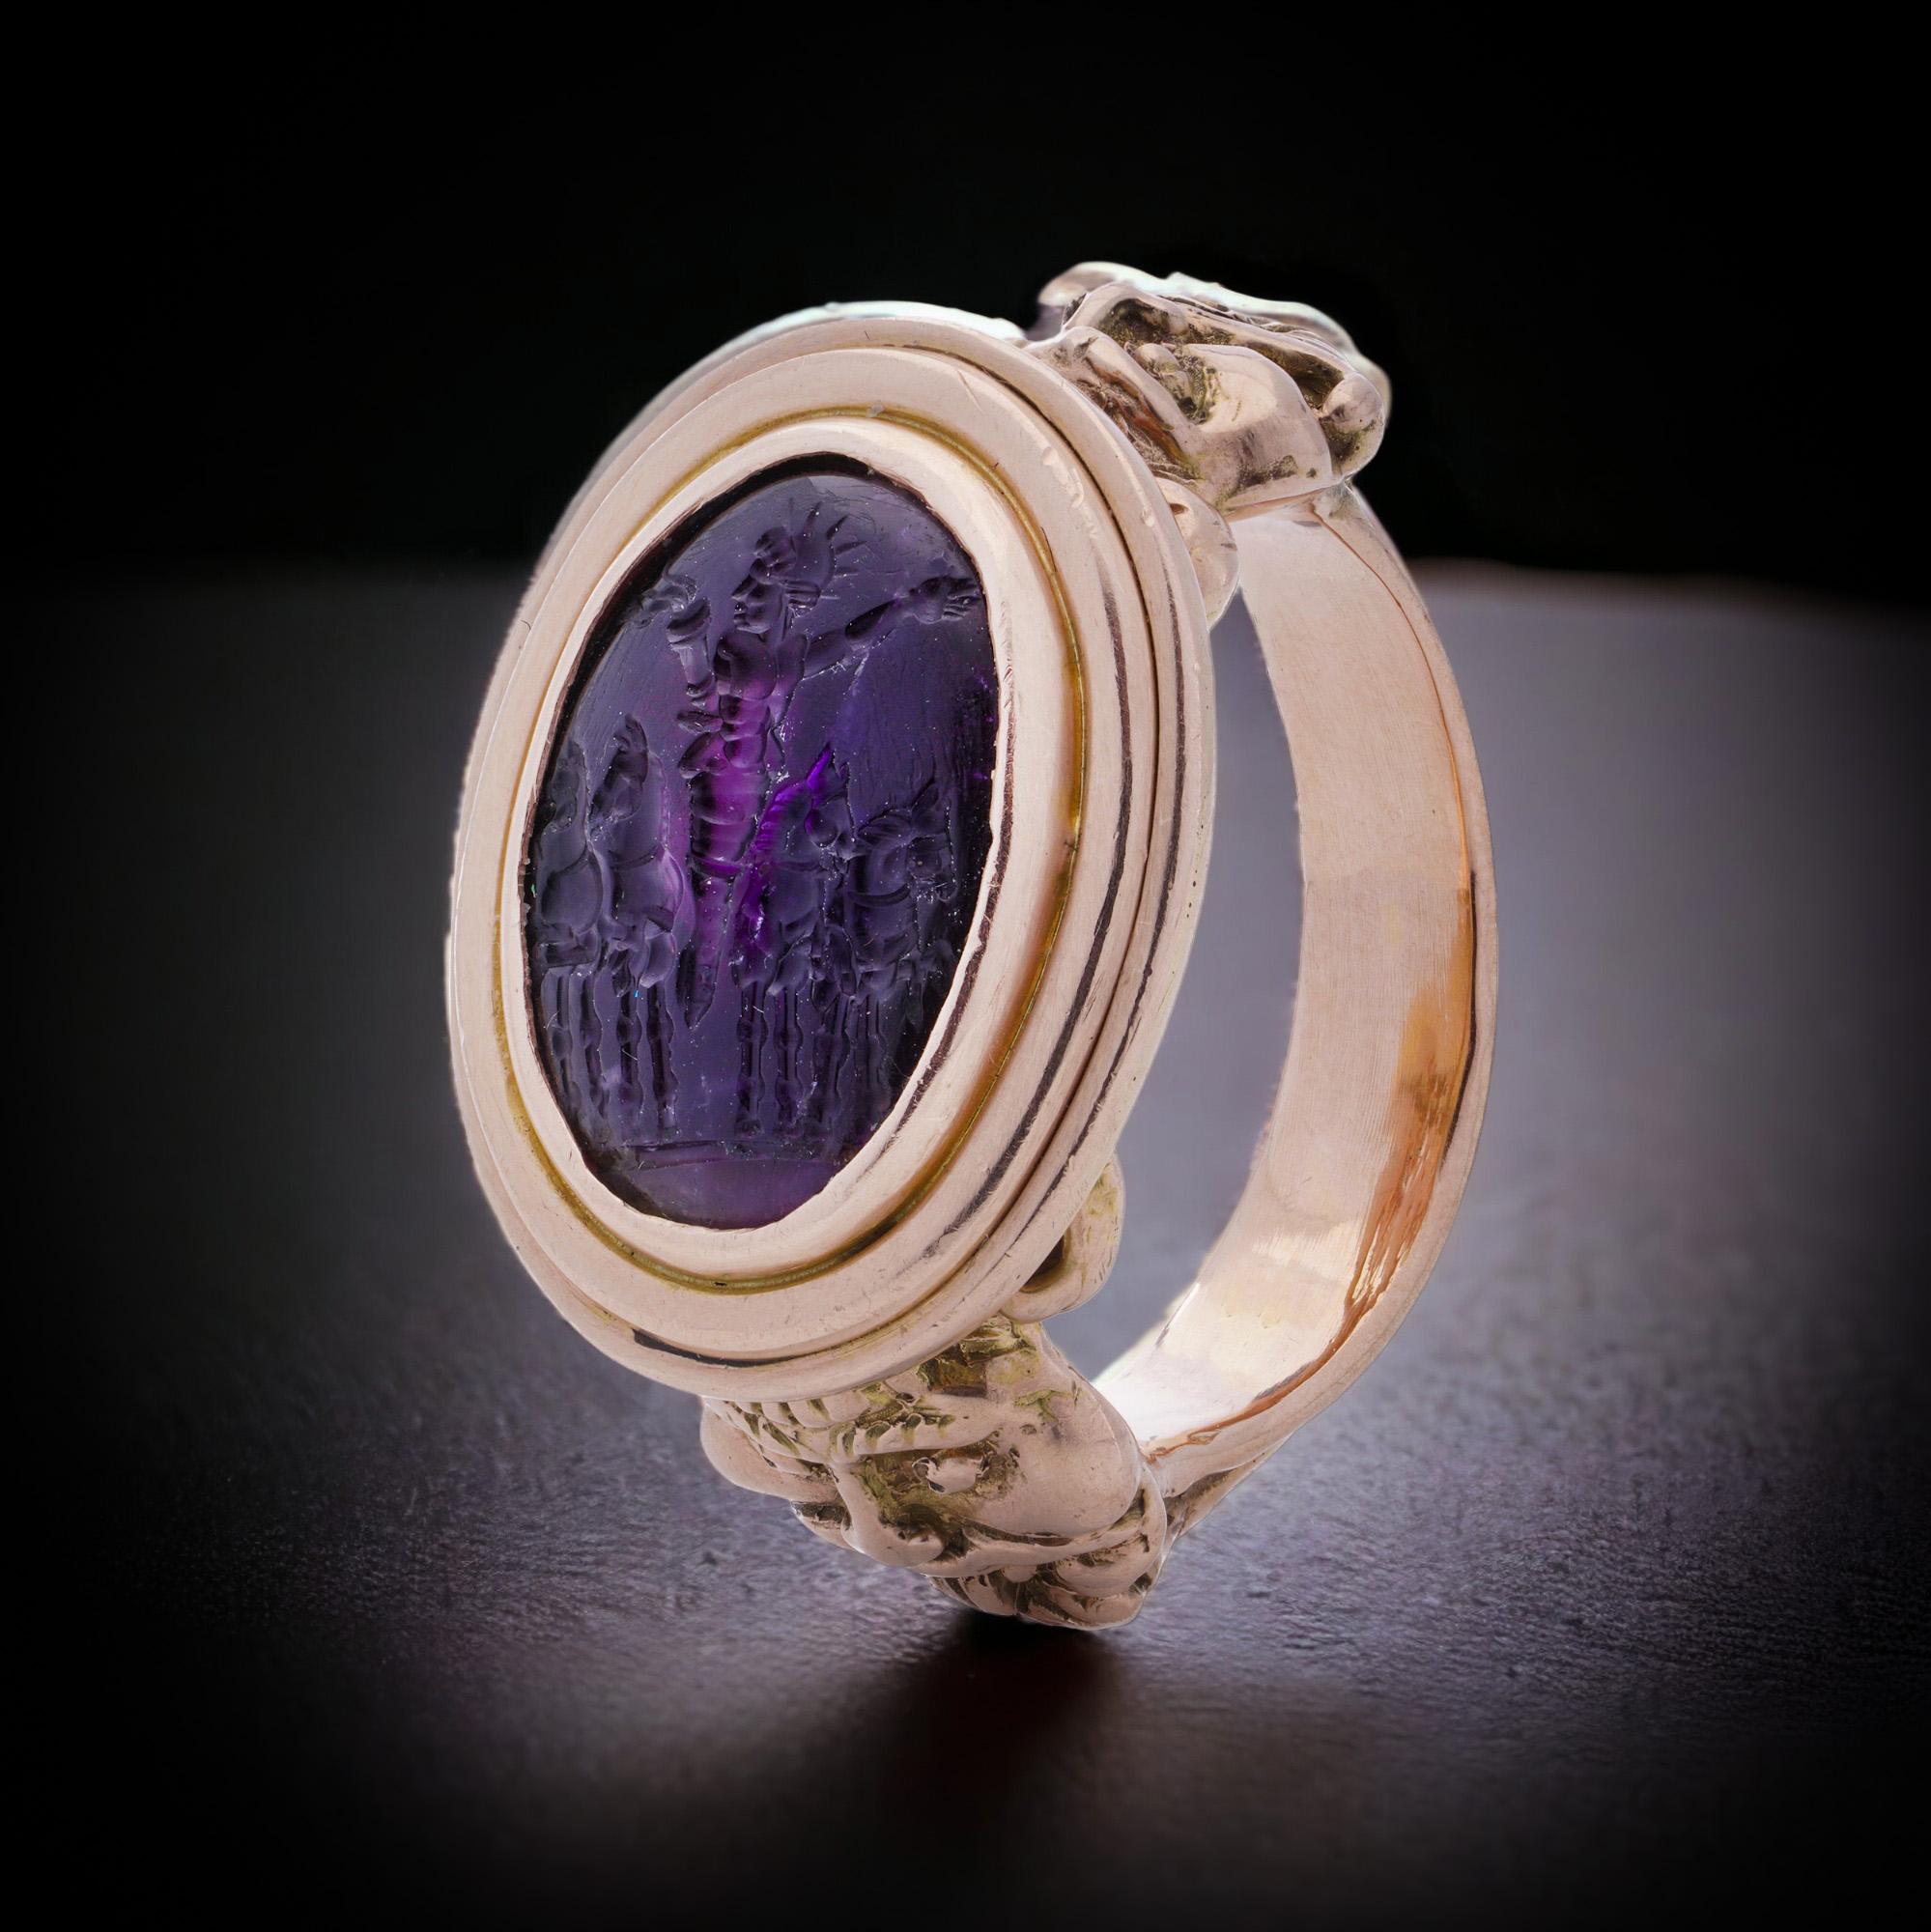 Antique 19th-century 10kt. pink gold men's large-sized intaglio ring with a carved amethyst, featuring the God Helios. The shoulders of the ring's shank are nicely decorated with two different face masks.
Made in Europe, Circa 1890's 
X-Ray has been